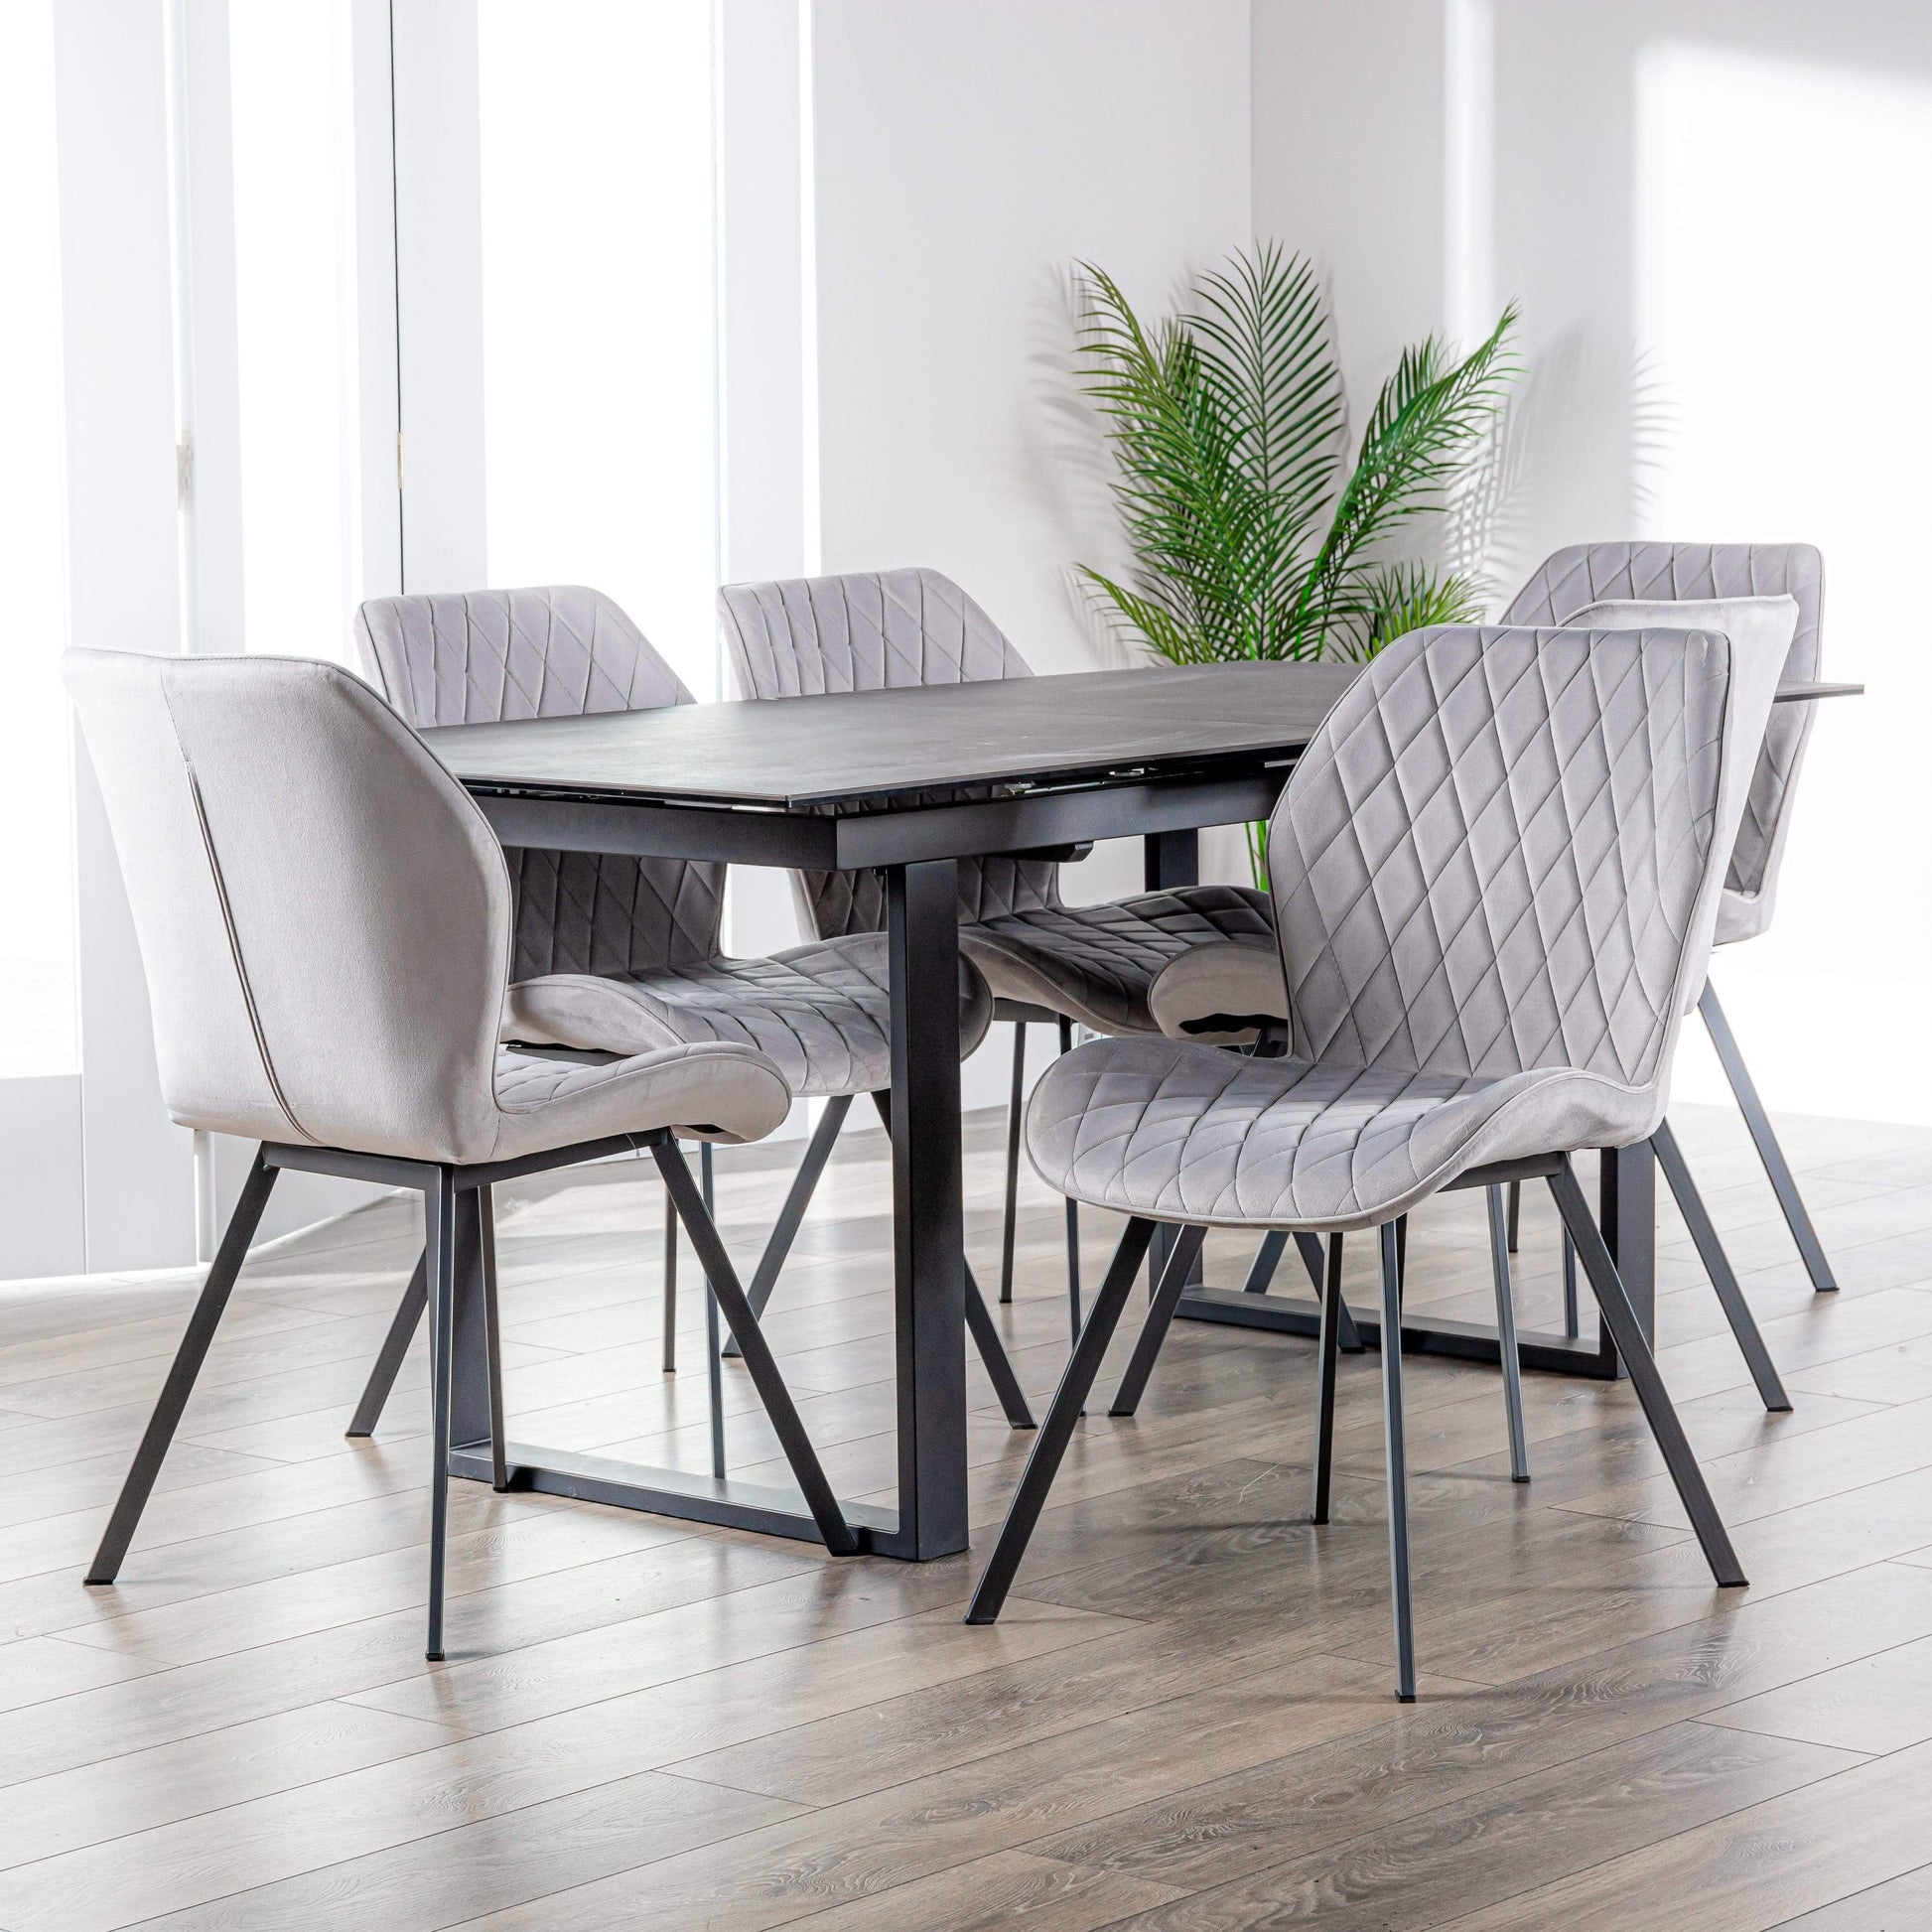 Furniture  -  Cuba Table And 6 Vancouver Chairs Dining Set  -  60000639